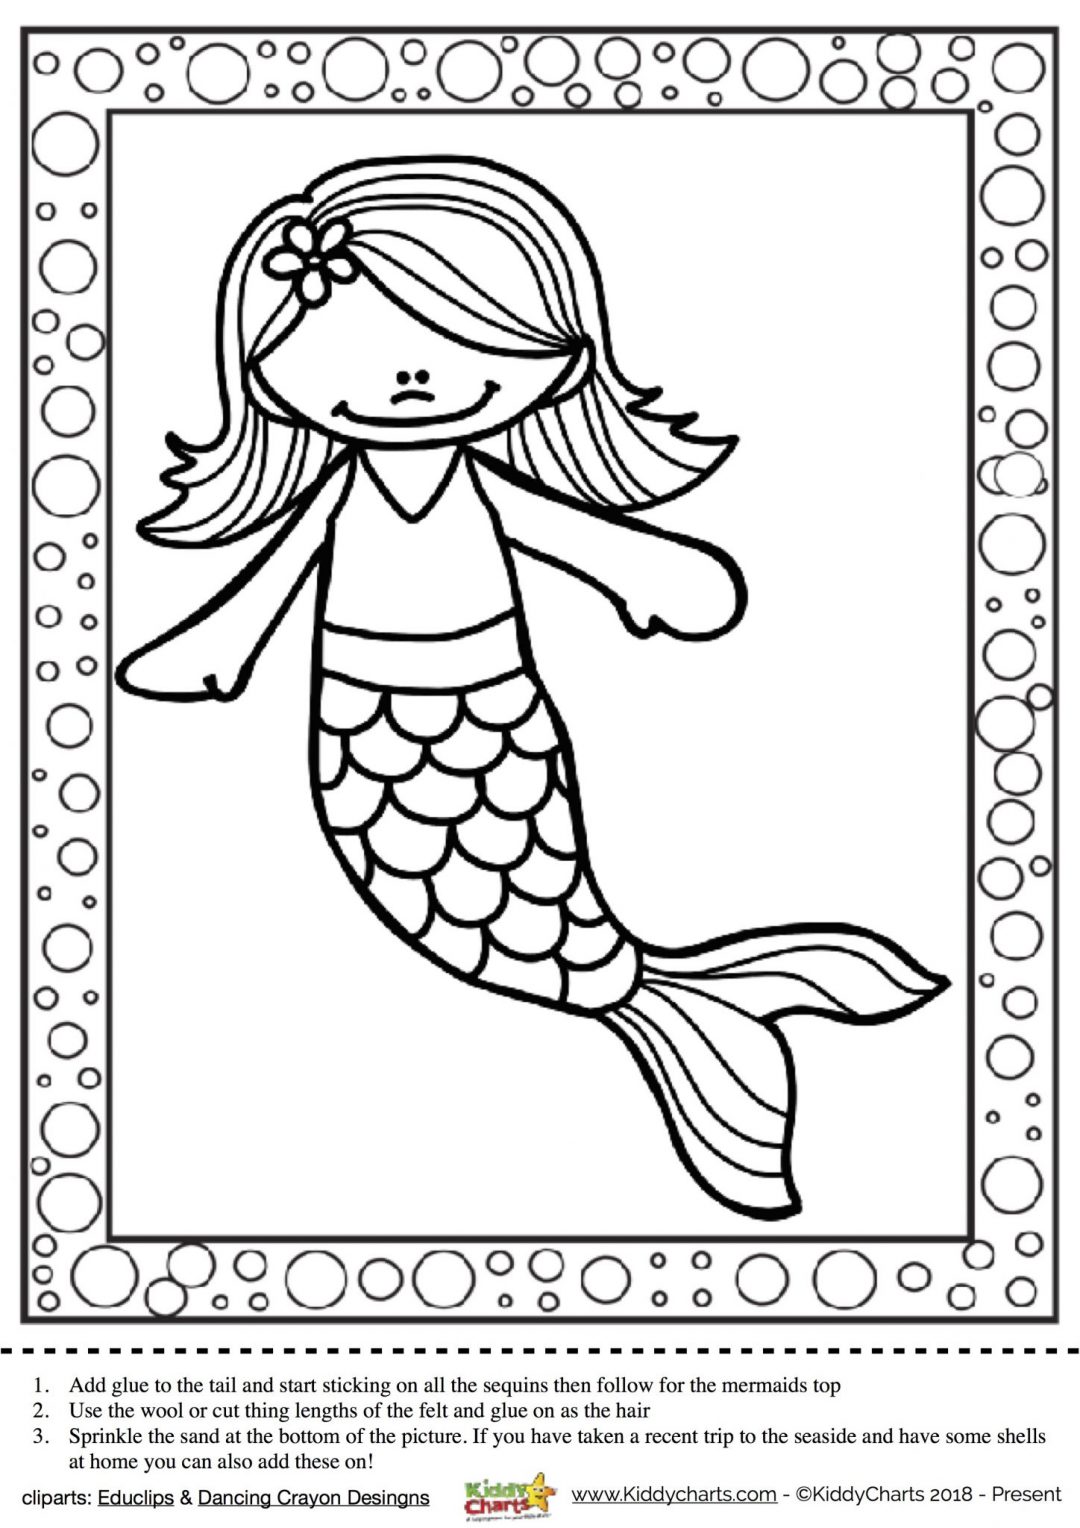 Mermaid printable for free to help make a glittery craft with the kids. Sequins under the sea #mermaids #kidscrafts